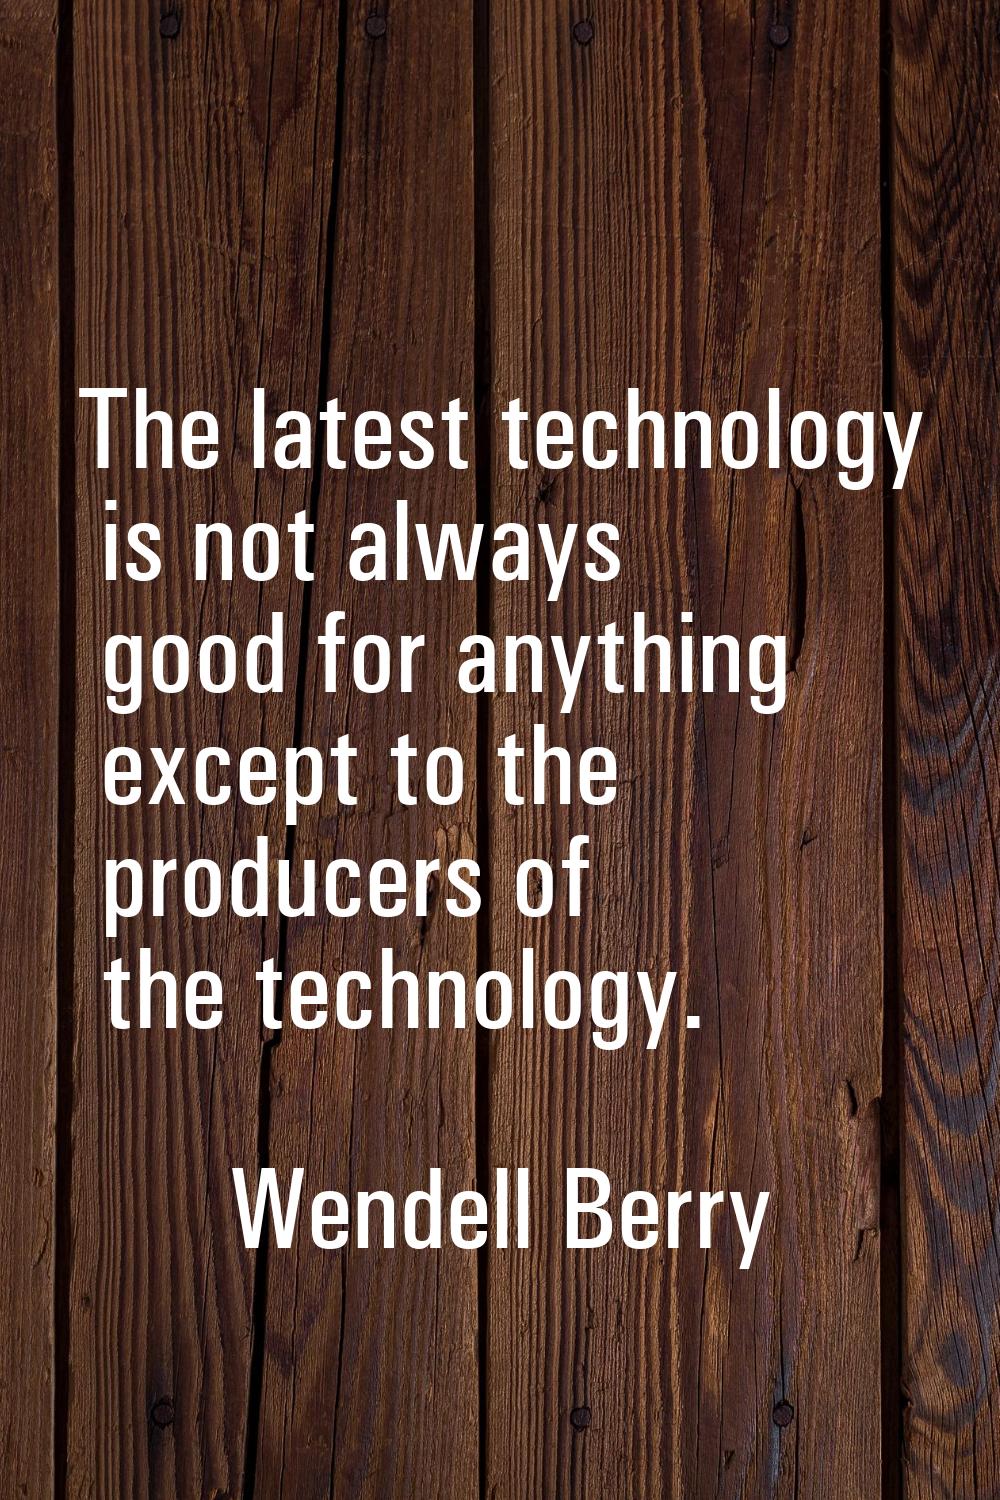 The latest technology is not always good for anything except to the producers of the technology.